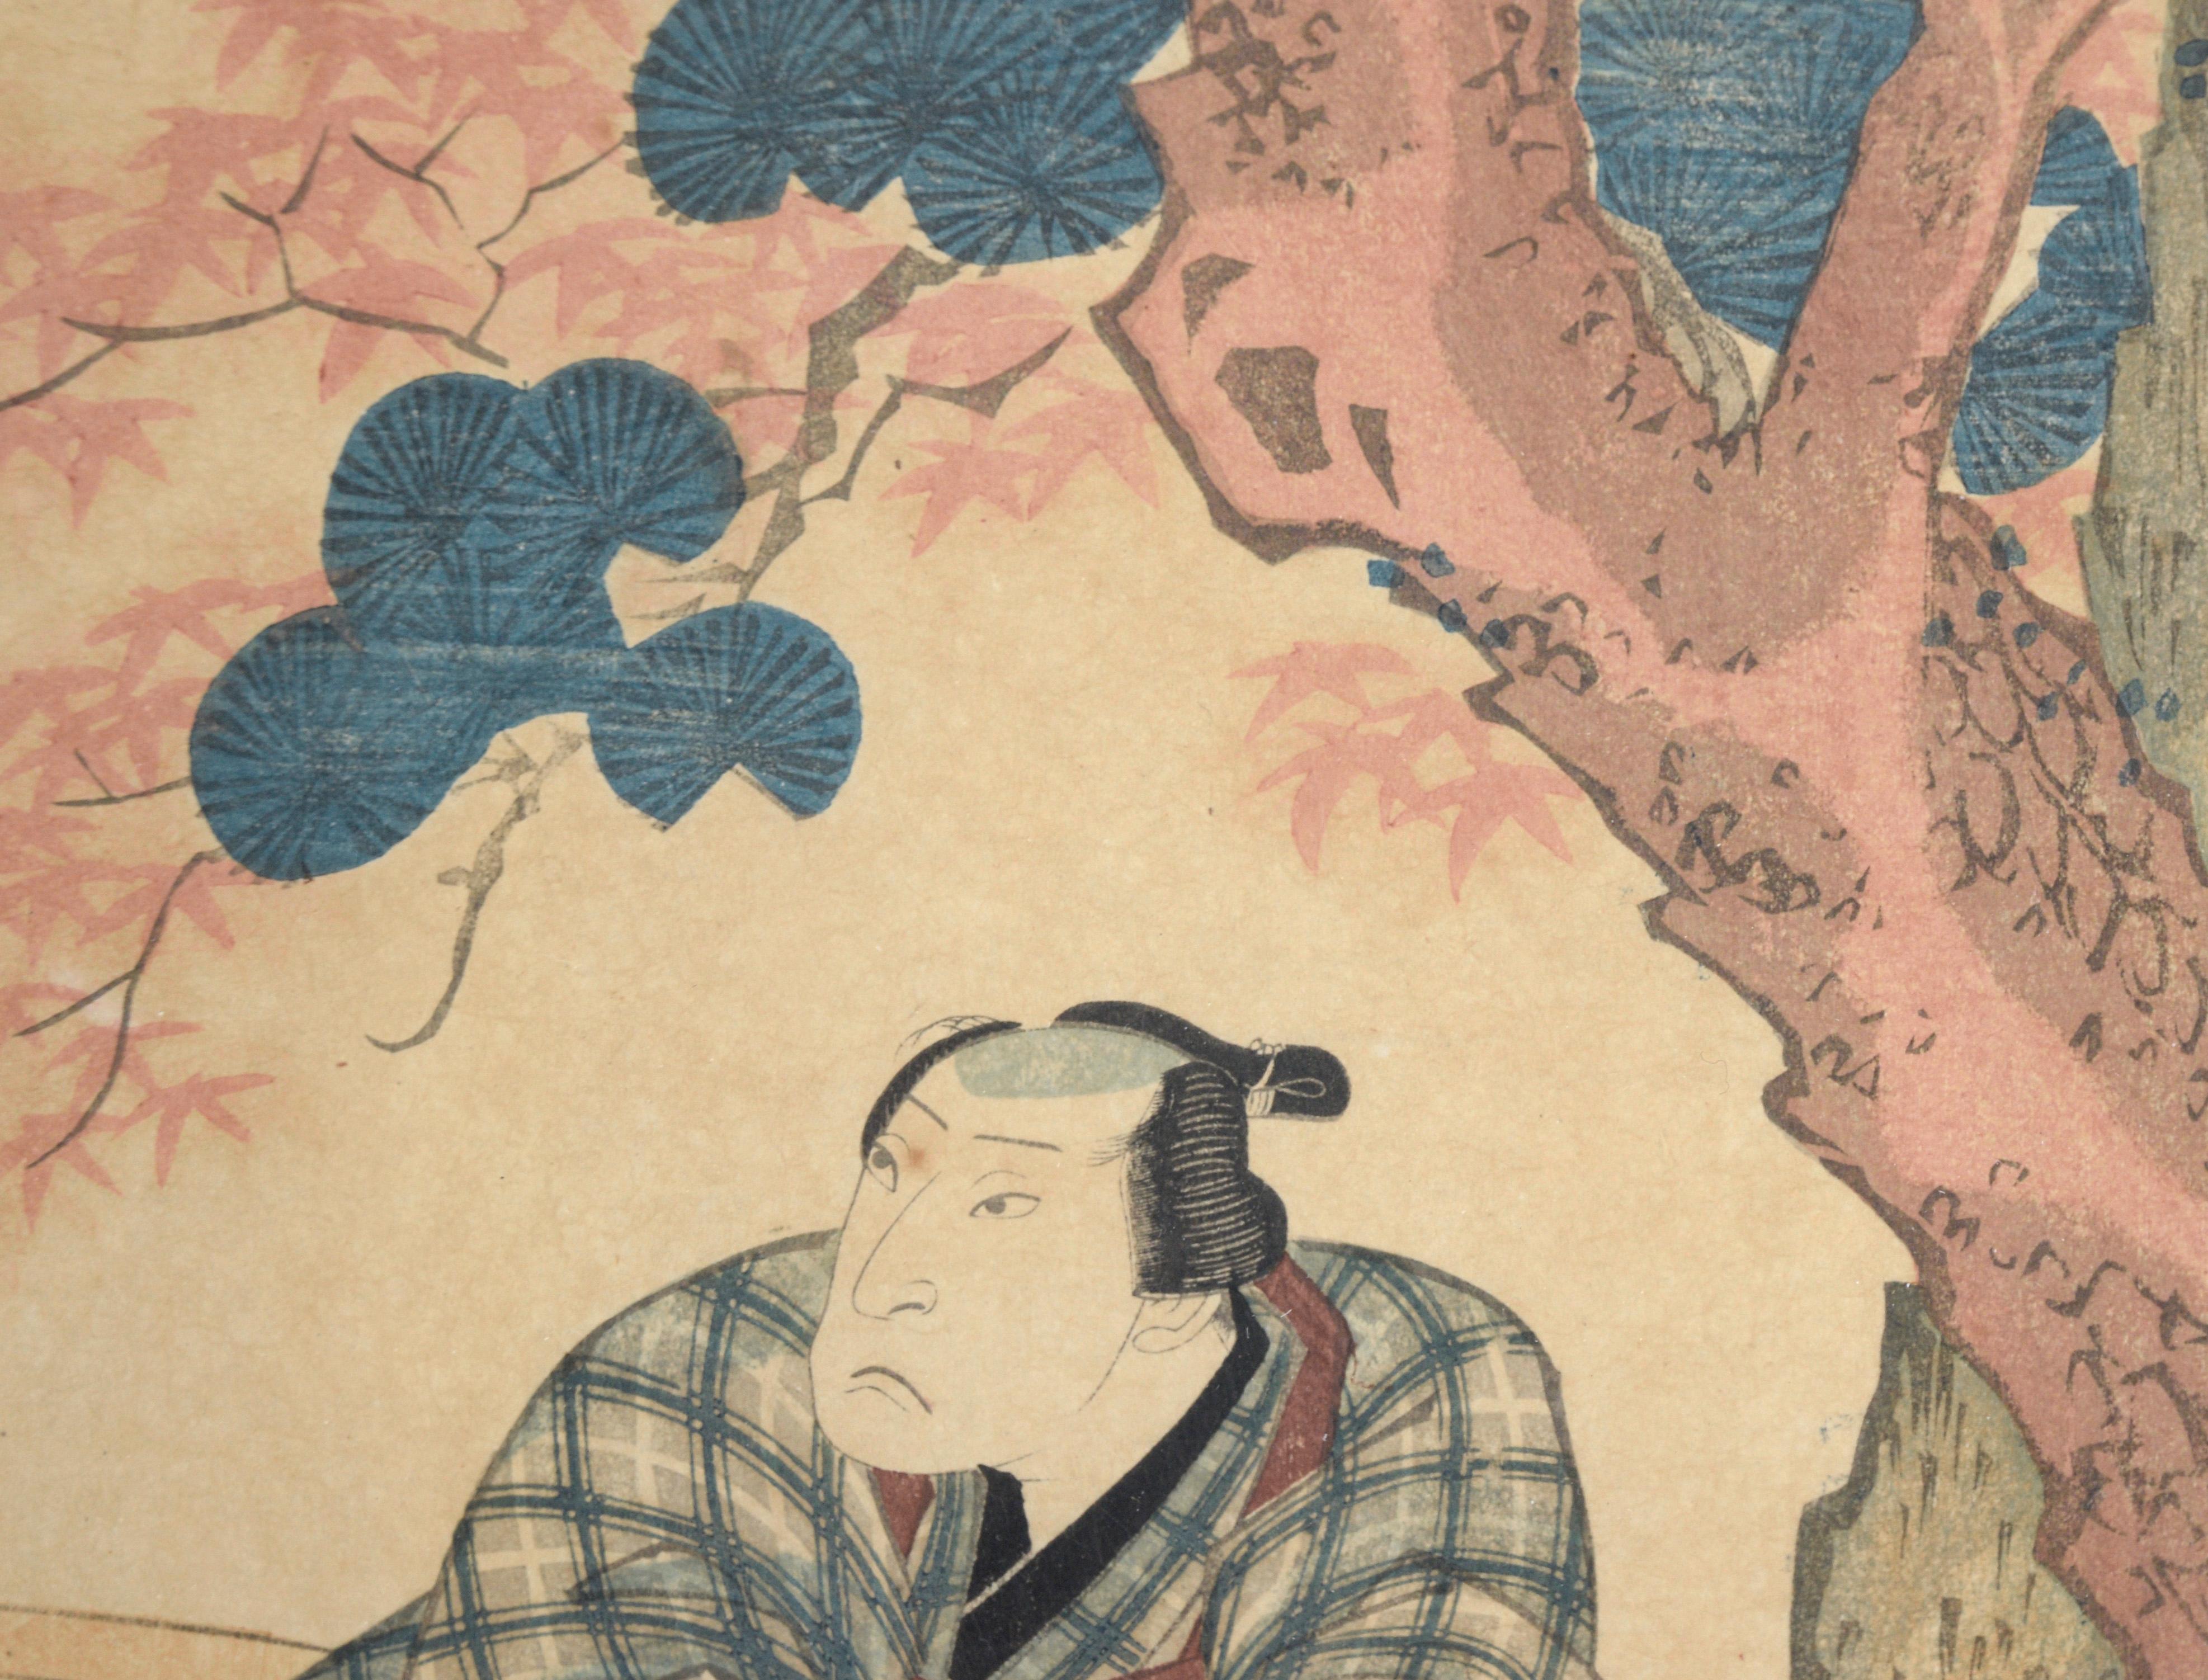 Actor Arashi Rikan II as Aburaya Yohei - Figurative Woodblock Print on Paper

Woodblock print of kabuki actor by Shunbaisai Hokuei (Japanese, d. 1837). The actor is an oil seller, leaning against two large barrels suspended on a rod. The play